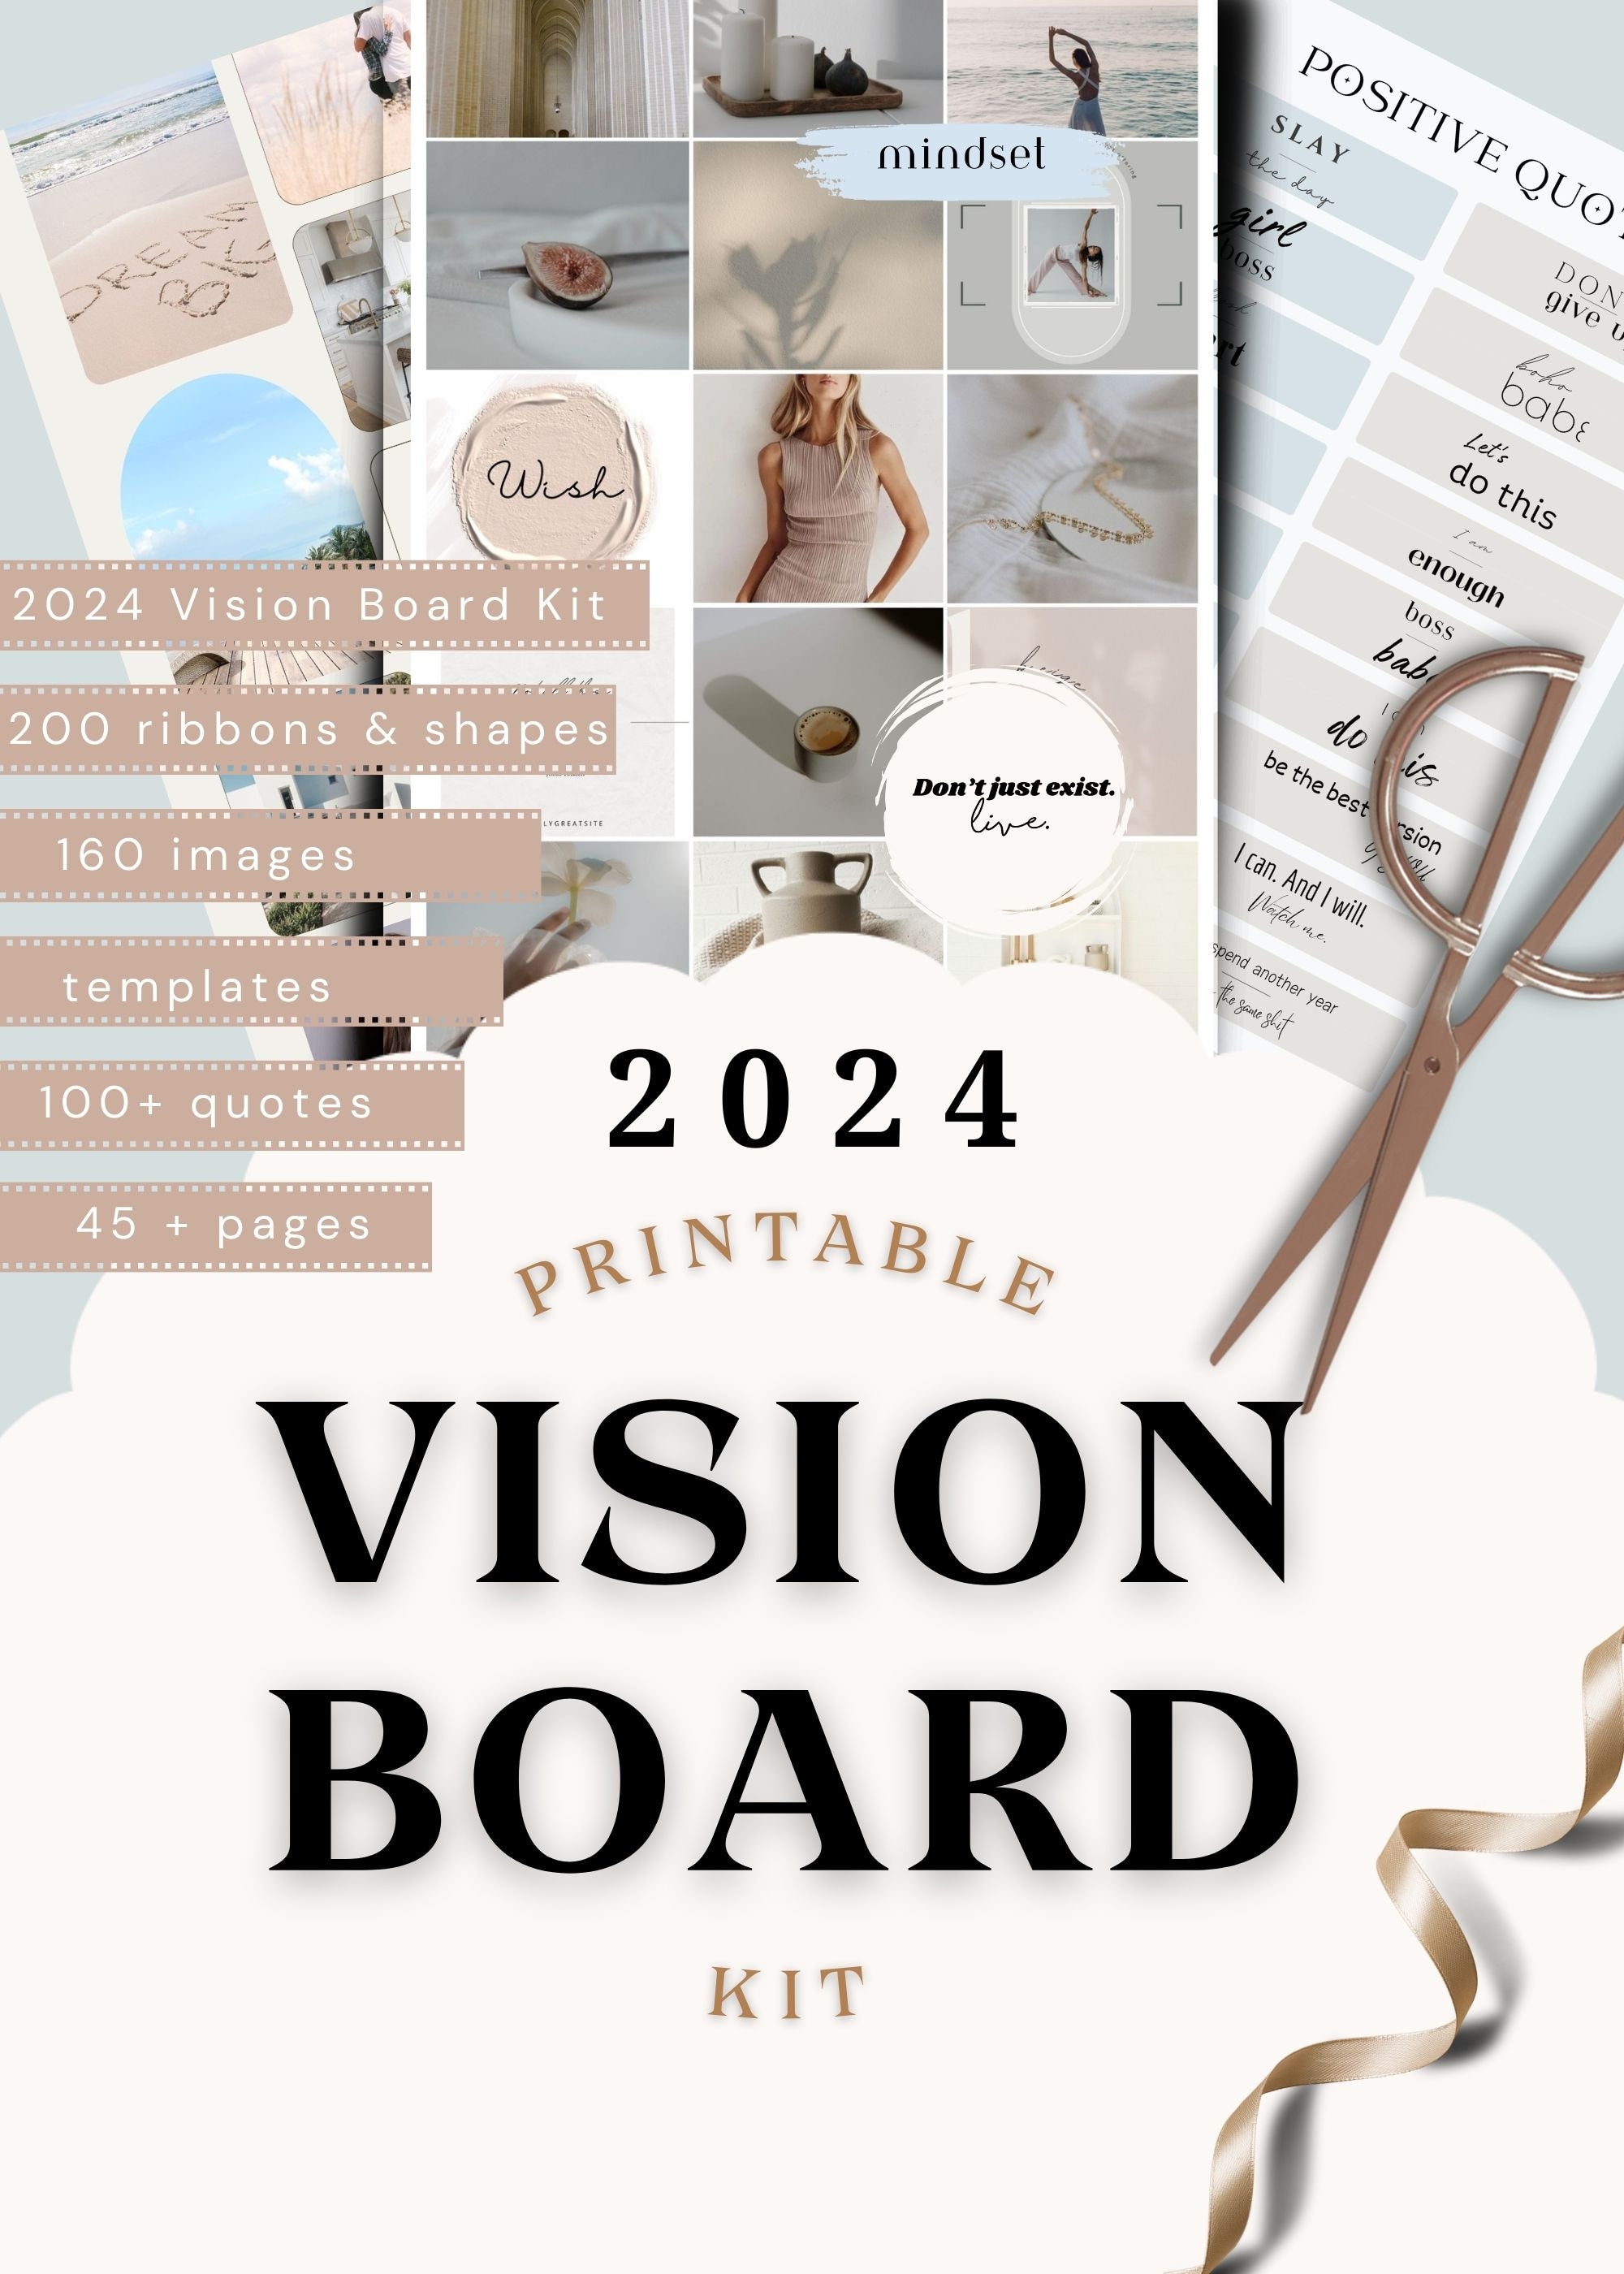 Vision Board 2024 Journal, Vision Board Words, New Year Resolutions Journal  Positive Affirmations Daily Reminders Gift Mental Health Journal 